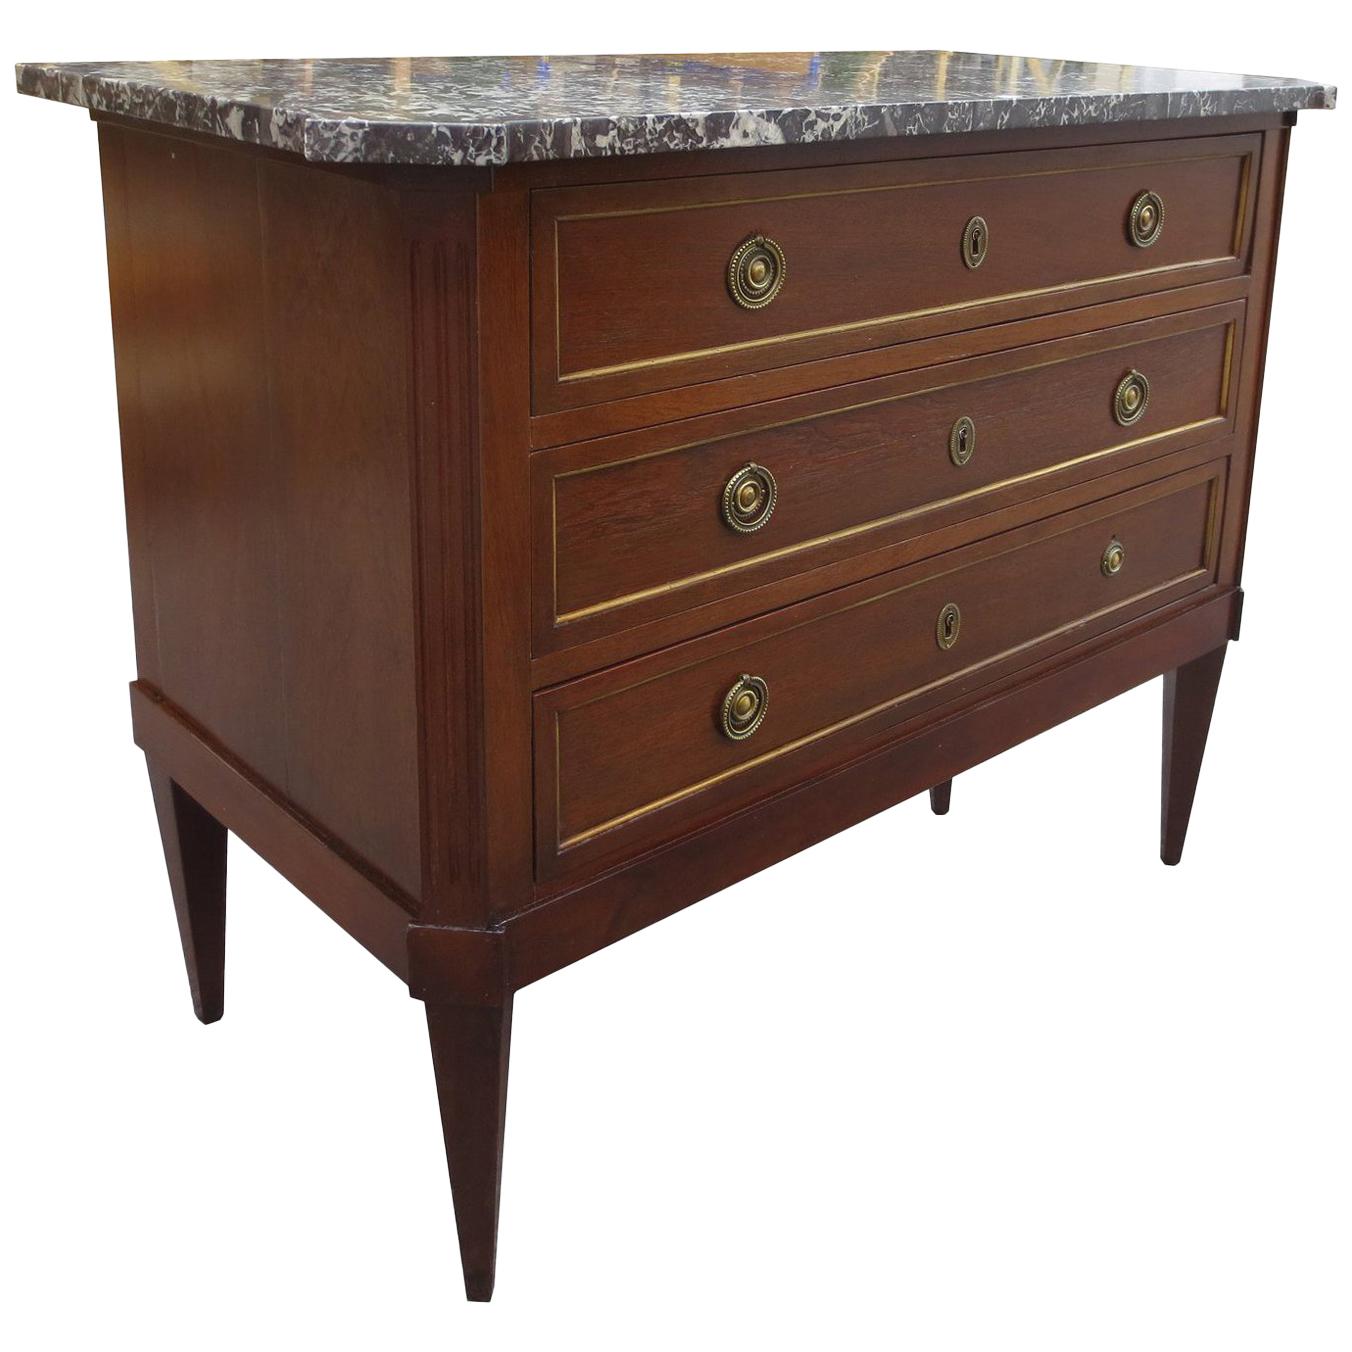 18th-19th Century Marble-Top Louis XVI Style Mahogany Chest